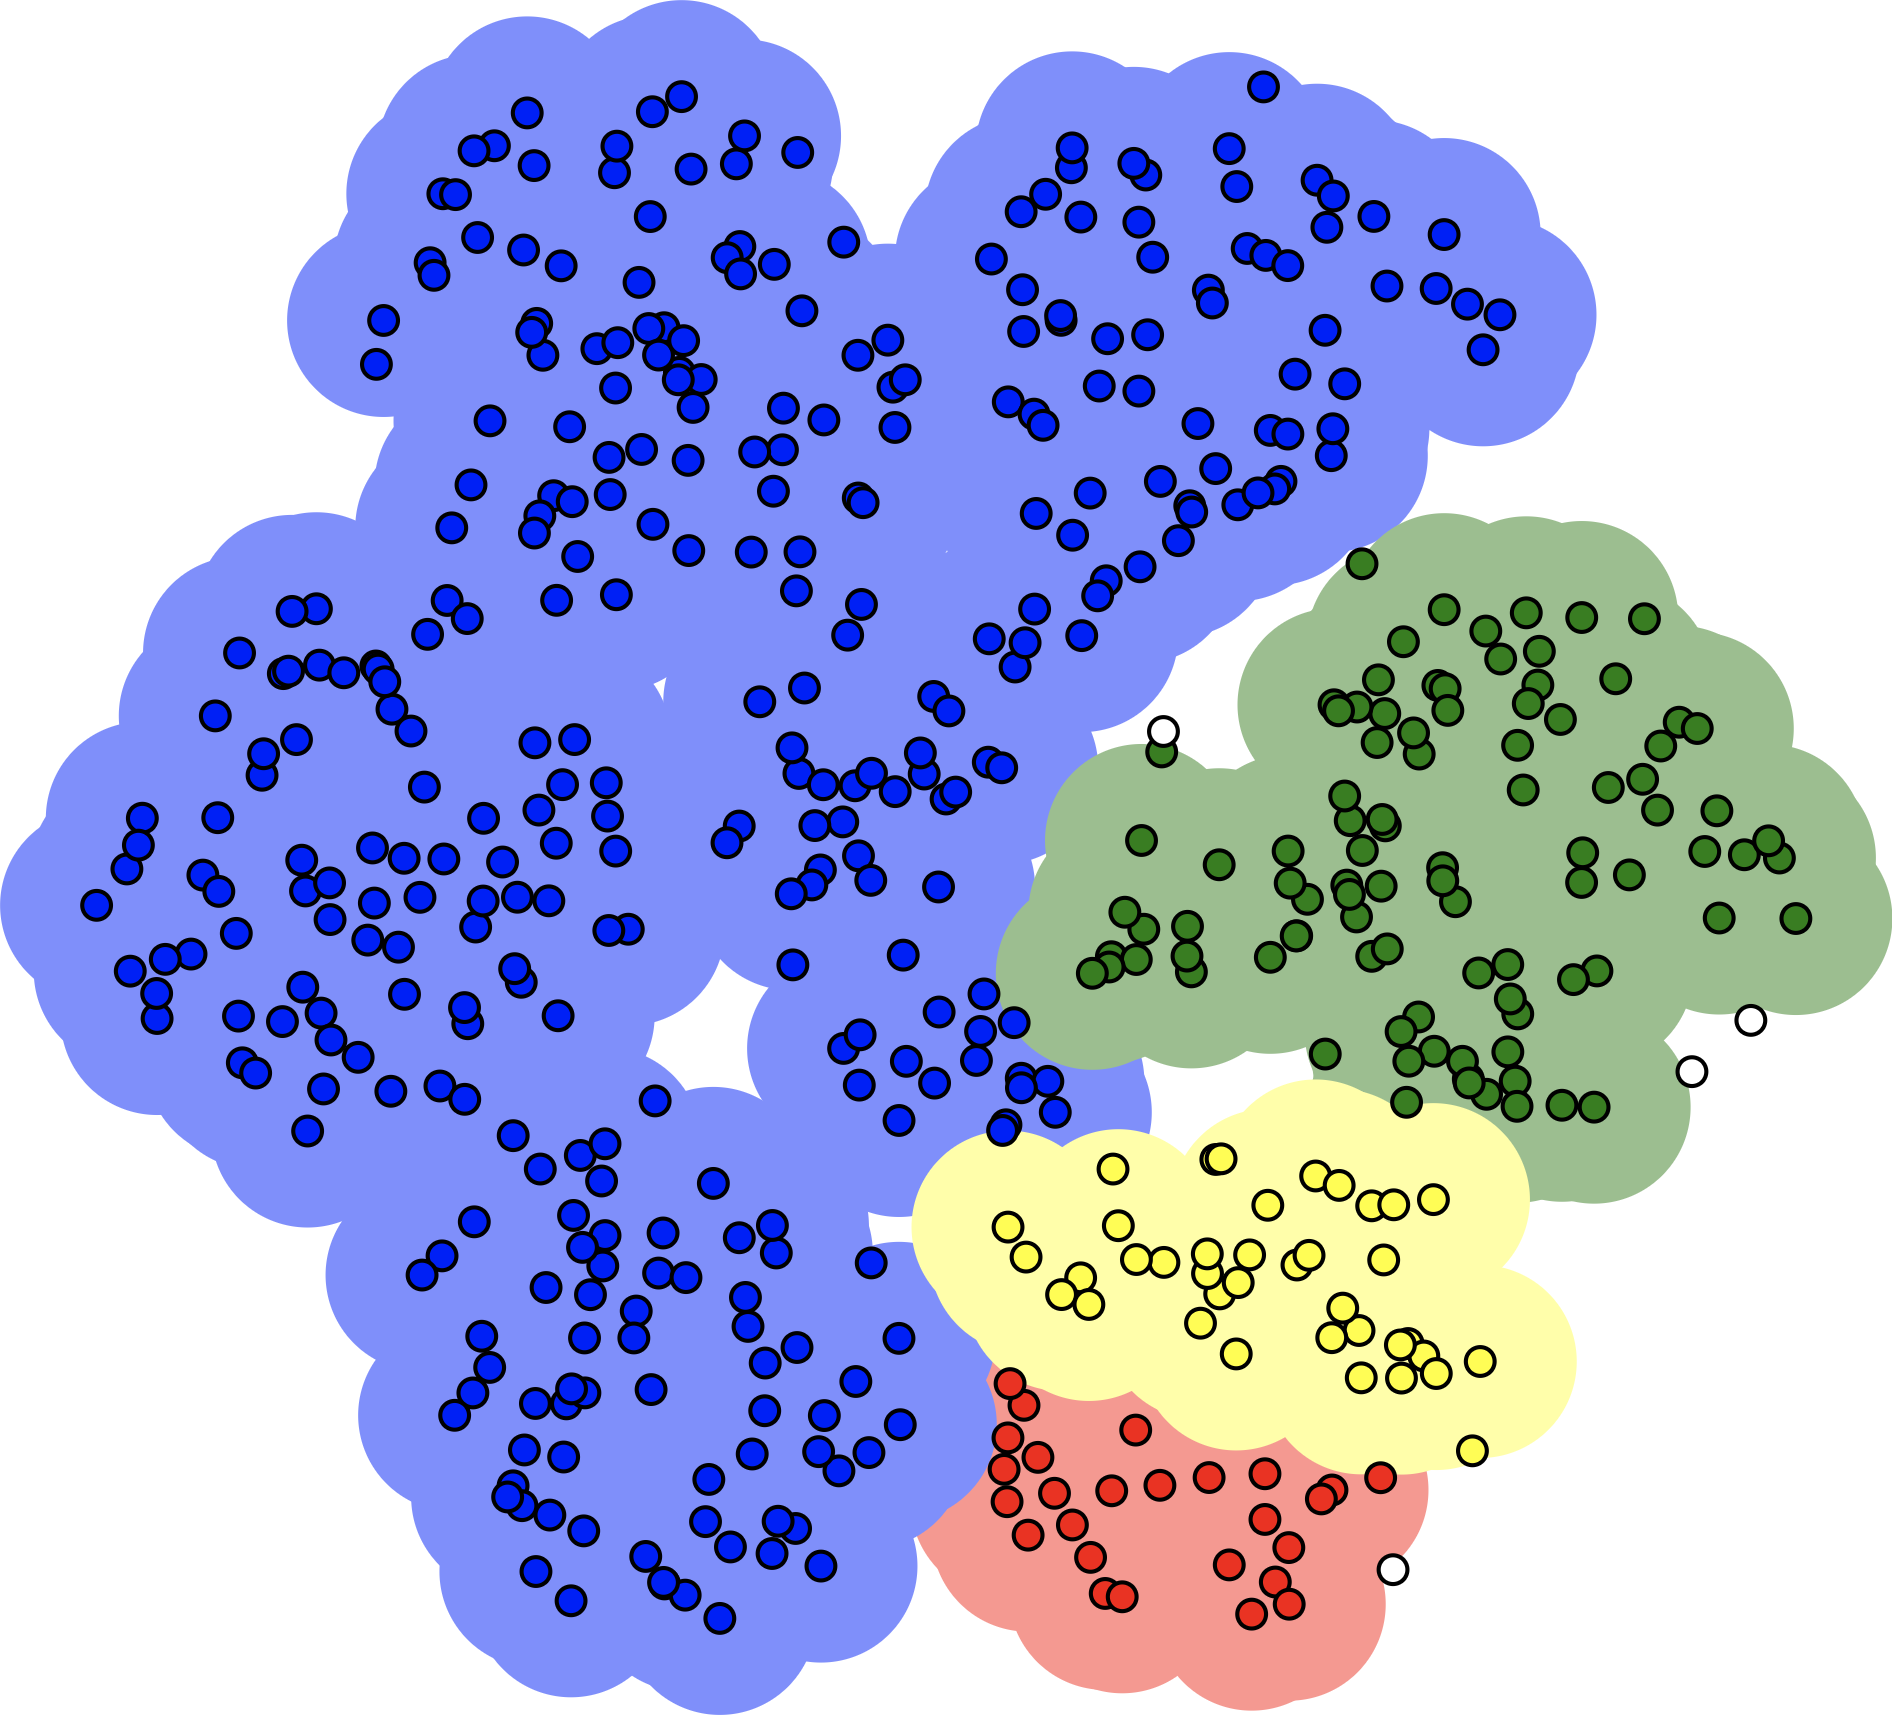 Illustration of hierarchical clustering, DBSCAN, and spectral clustering.